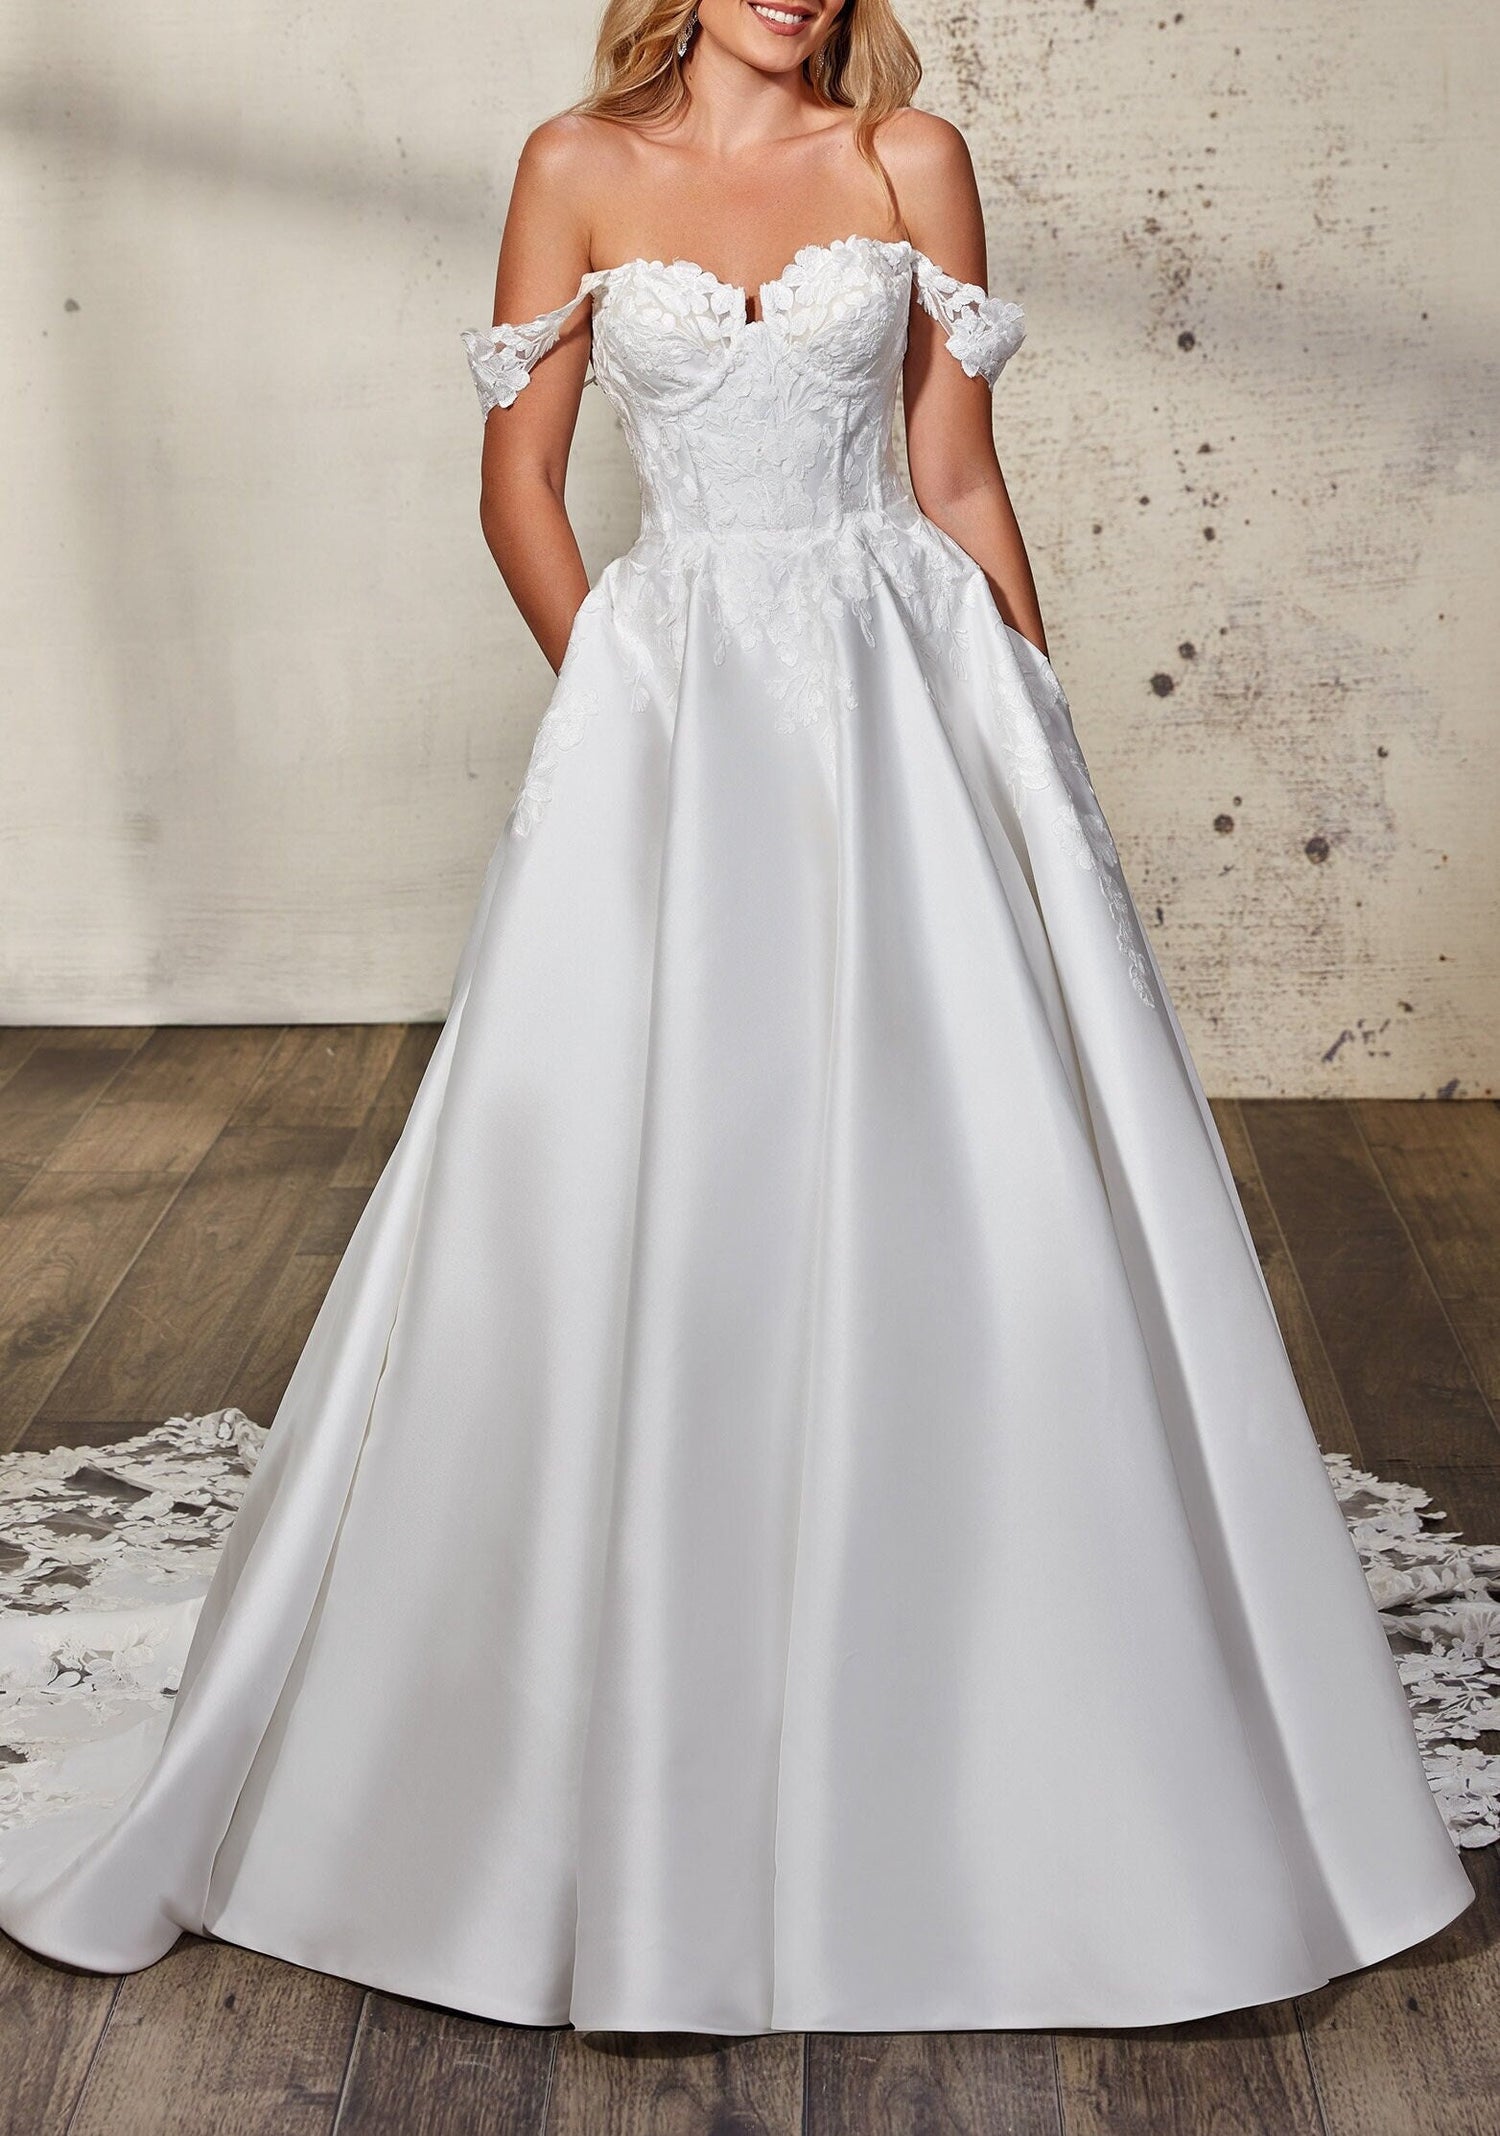 Satin Wedding Dress with Lace Appliques Sweetheart Neckline Off Shoulder Bridal Gown Custom Plus Size